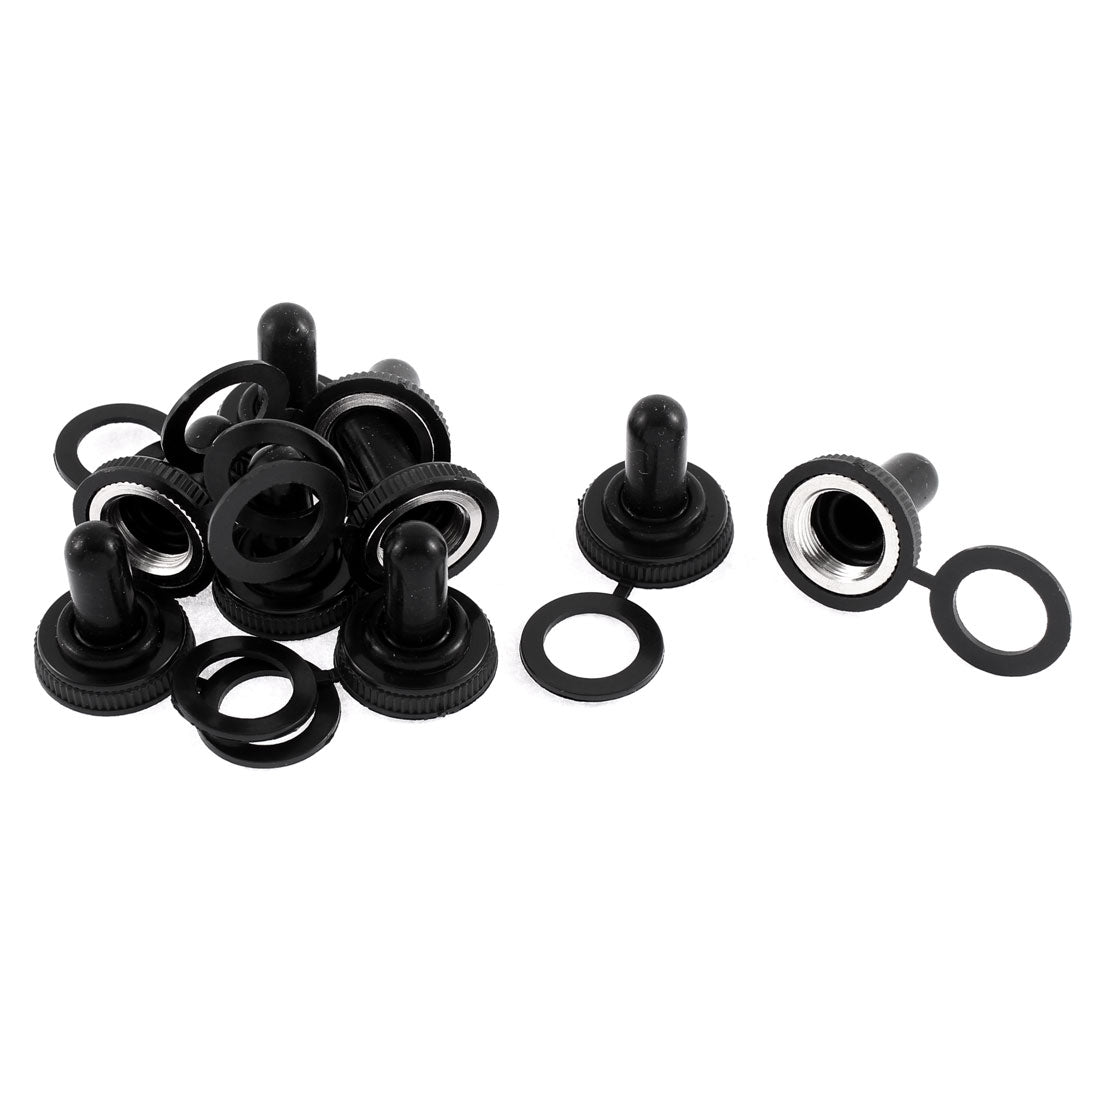 uxcell Uxcell 9pcs 12mm Thread Mini Toggle Switch Waterproof Rubber Cover Boot Cap Black